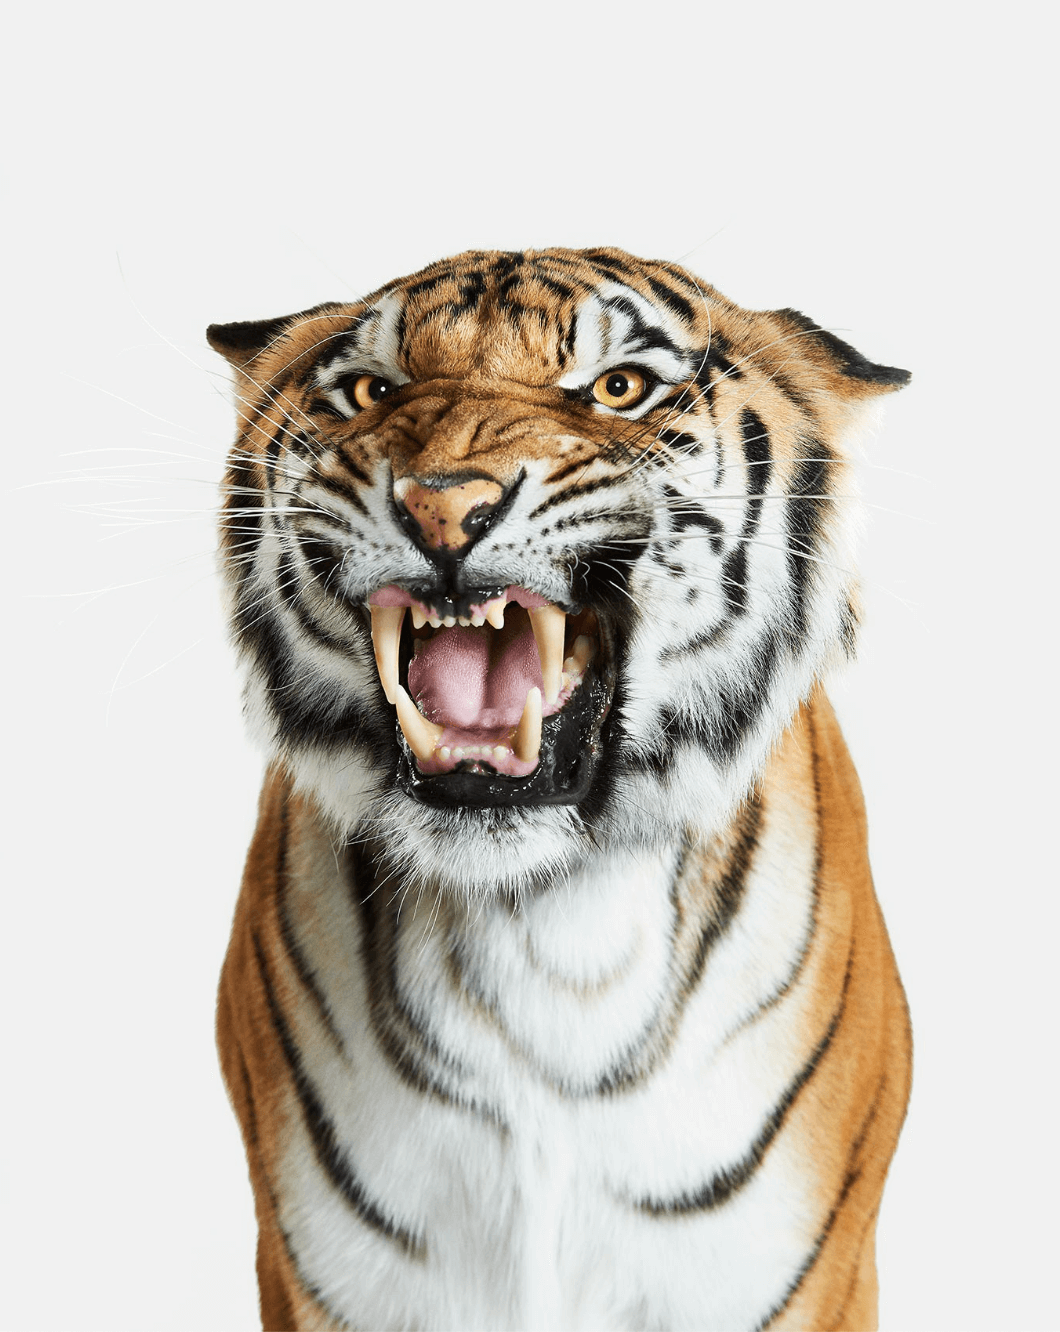 Exotic tiger potrait brought to life on ChromaLuxe Metal Prints by photographer Randal Ford.